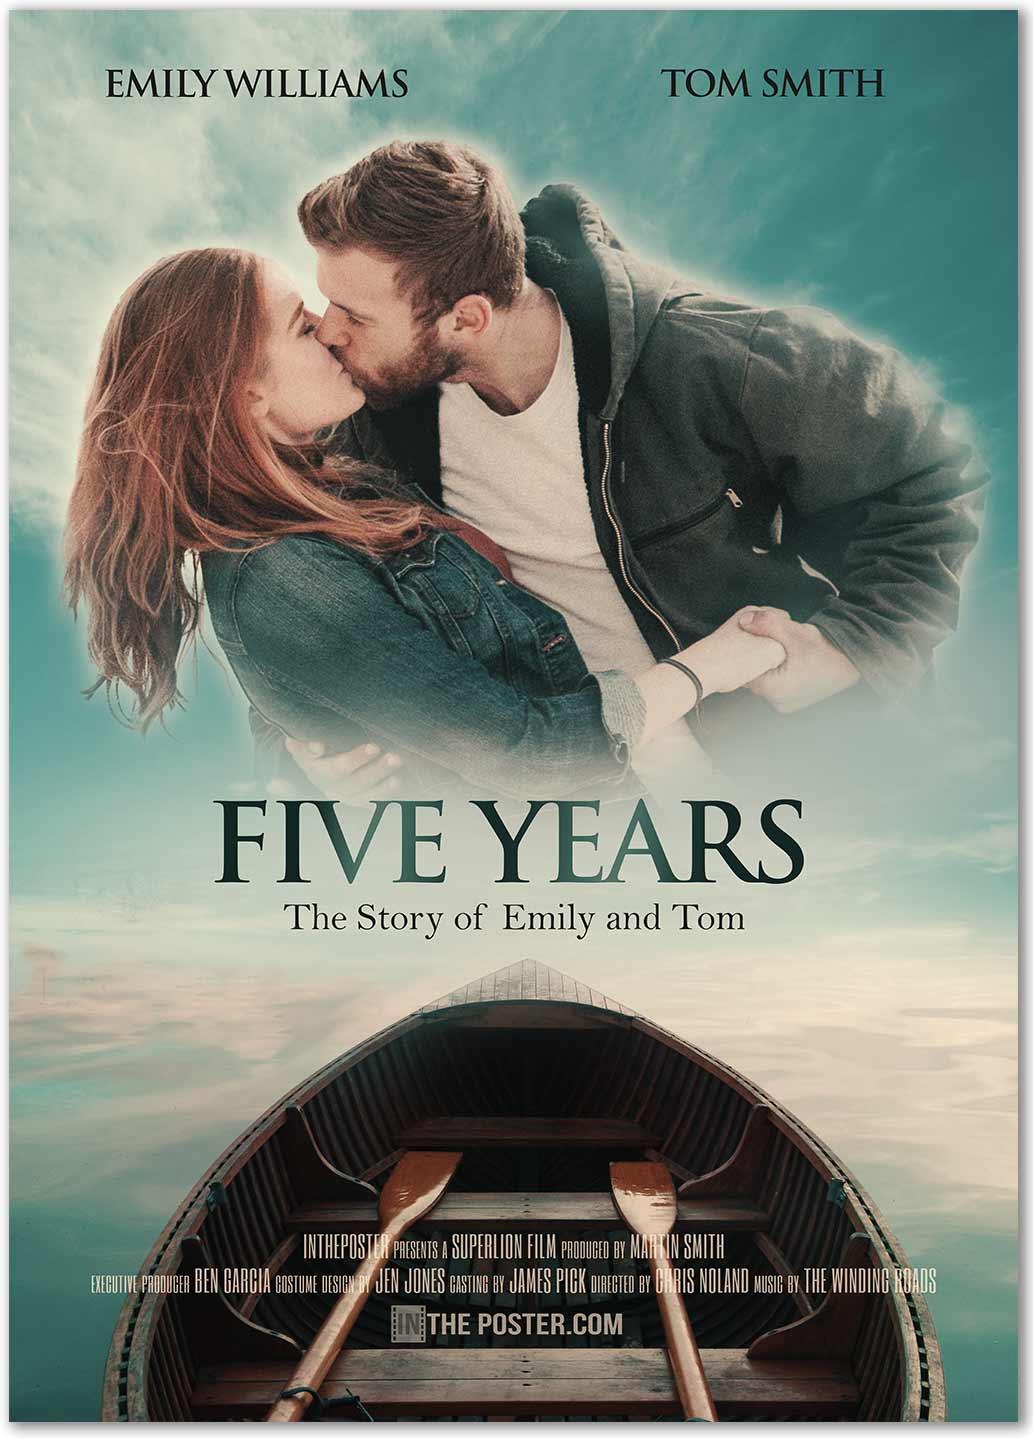 Five Years Romantic Movie Poster - the story of Emily and Tom. A couple embraces in the clouds above a rowing boat.